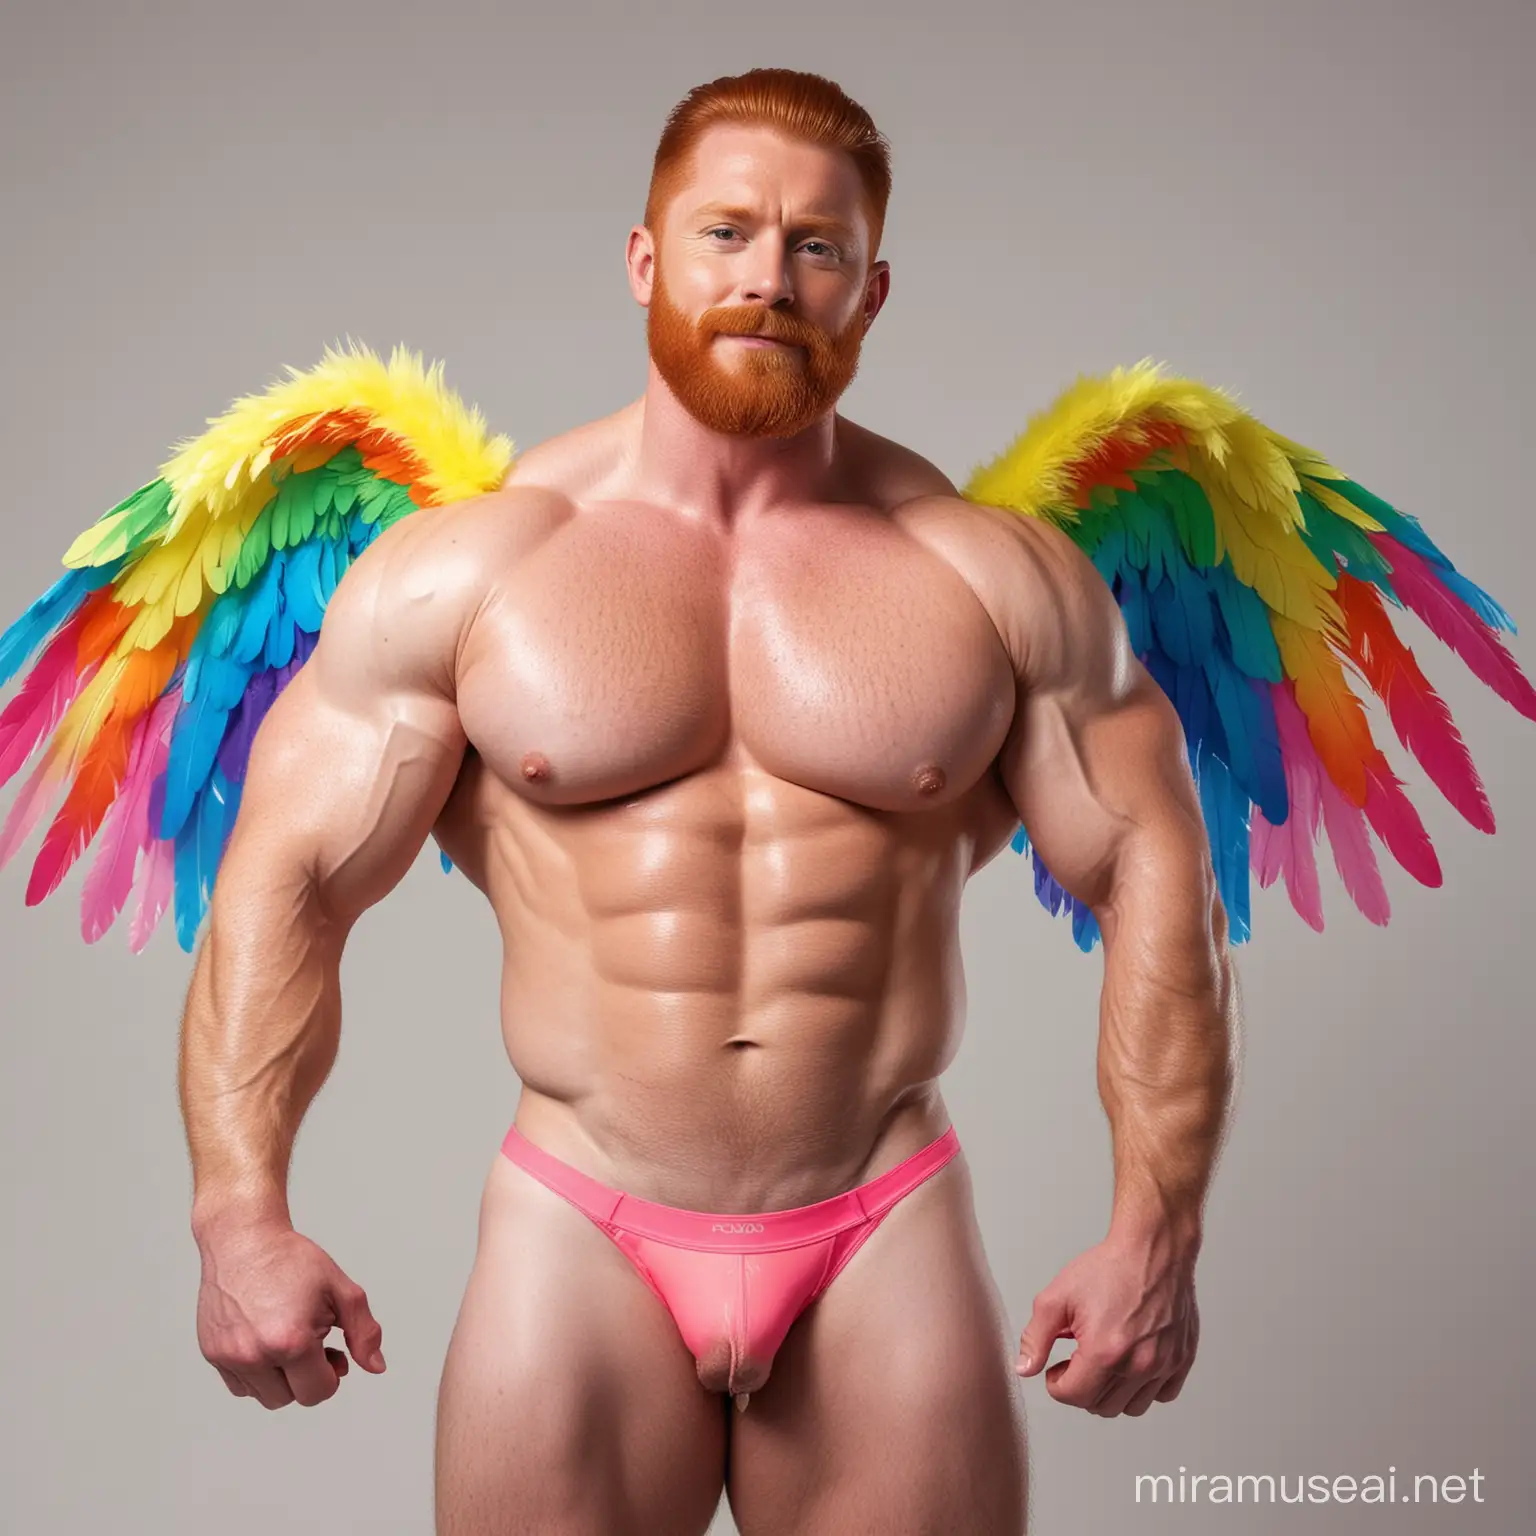 Muscular Redhead Bodybuilder Flexing Arm in Rainbow Jacket with Eagle Wings